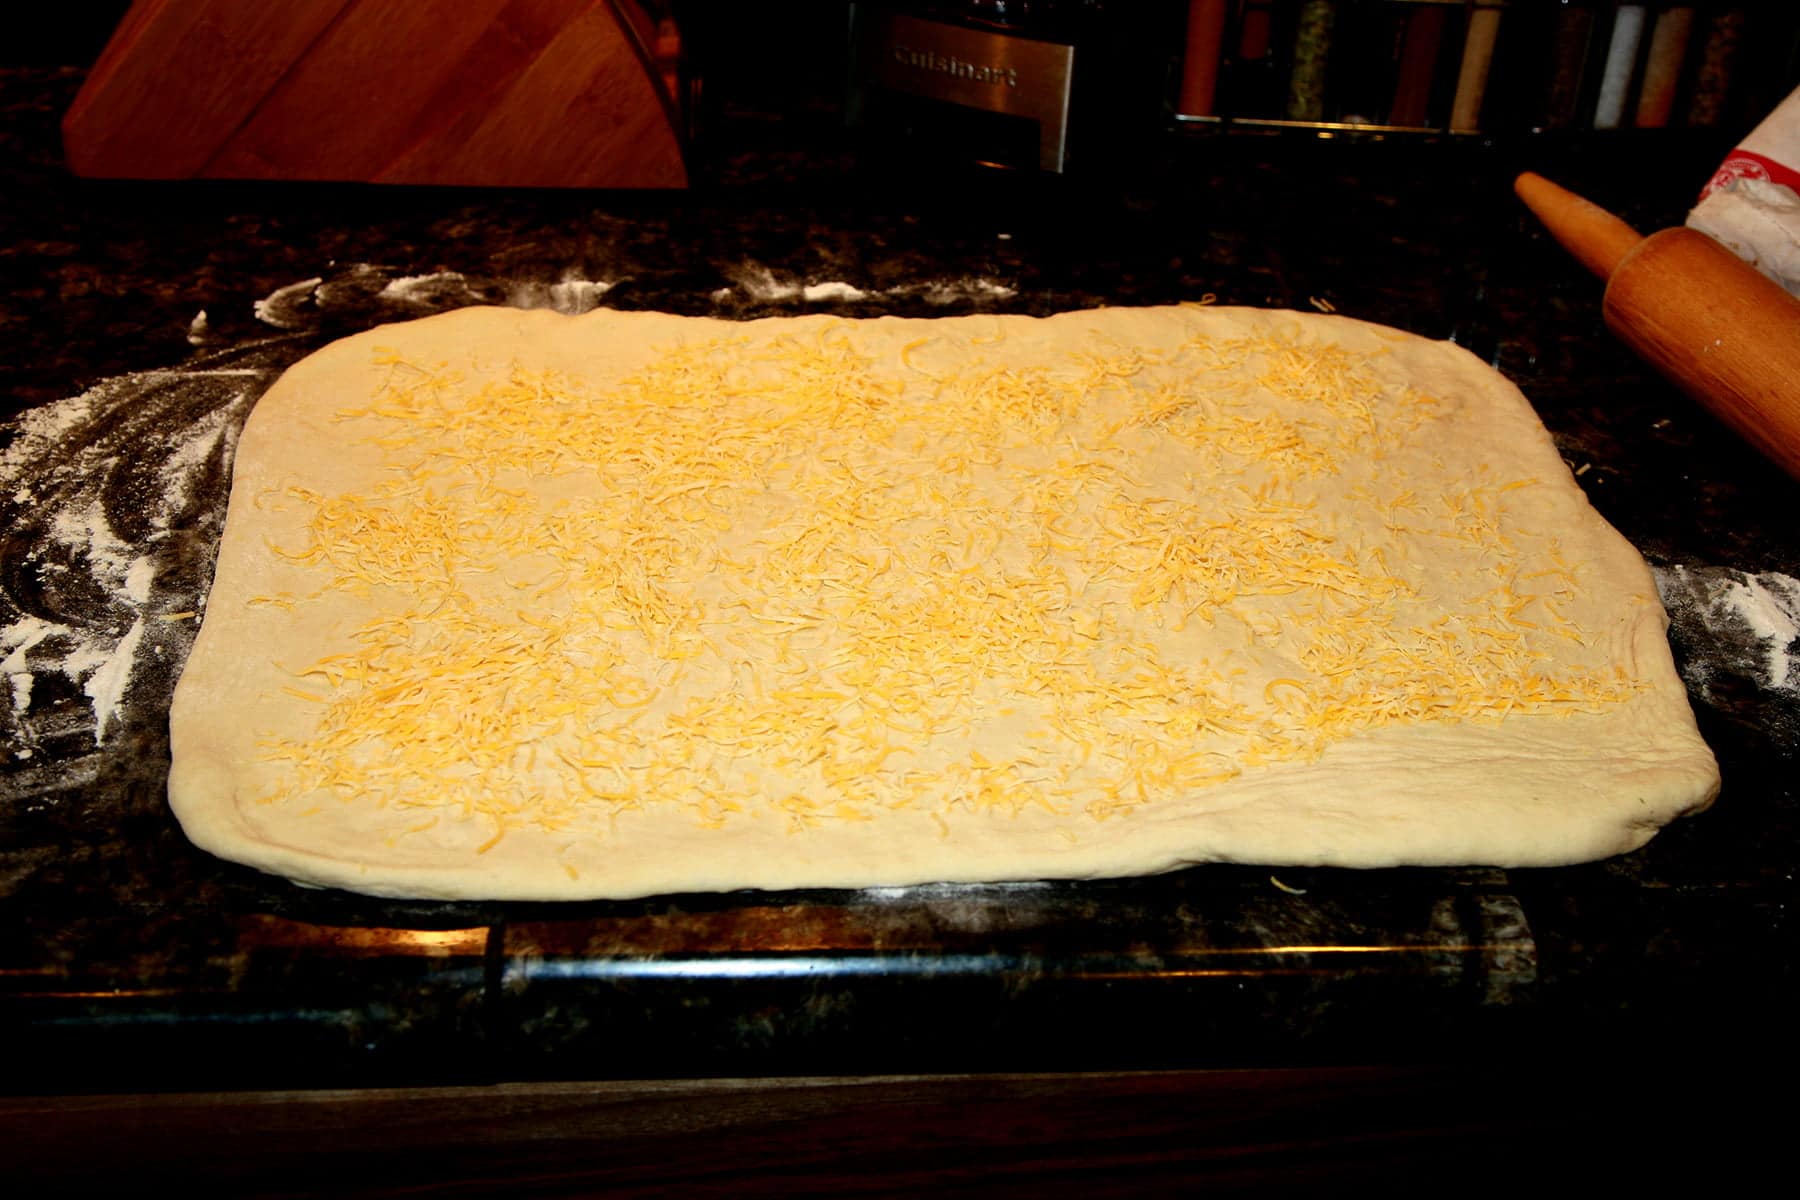 A rectangle of dough is rolled out on a counter, and covered in shredded cheese.